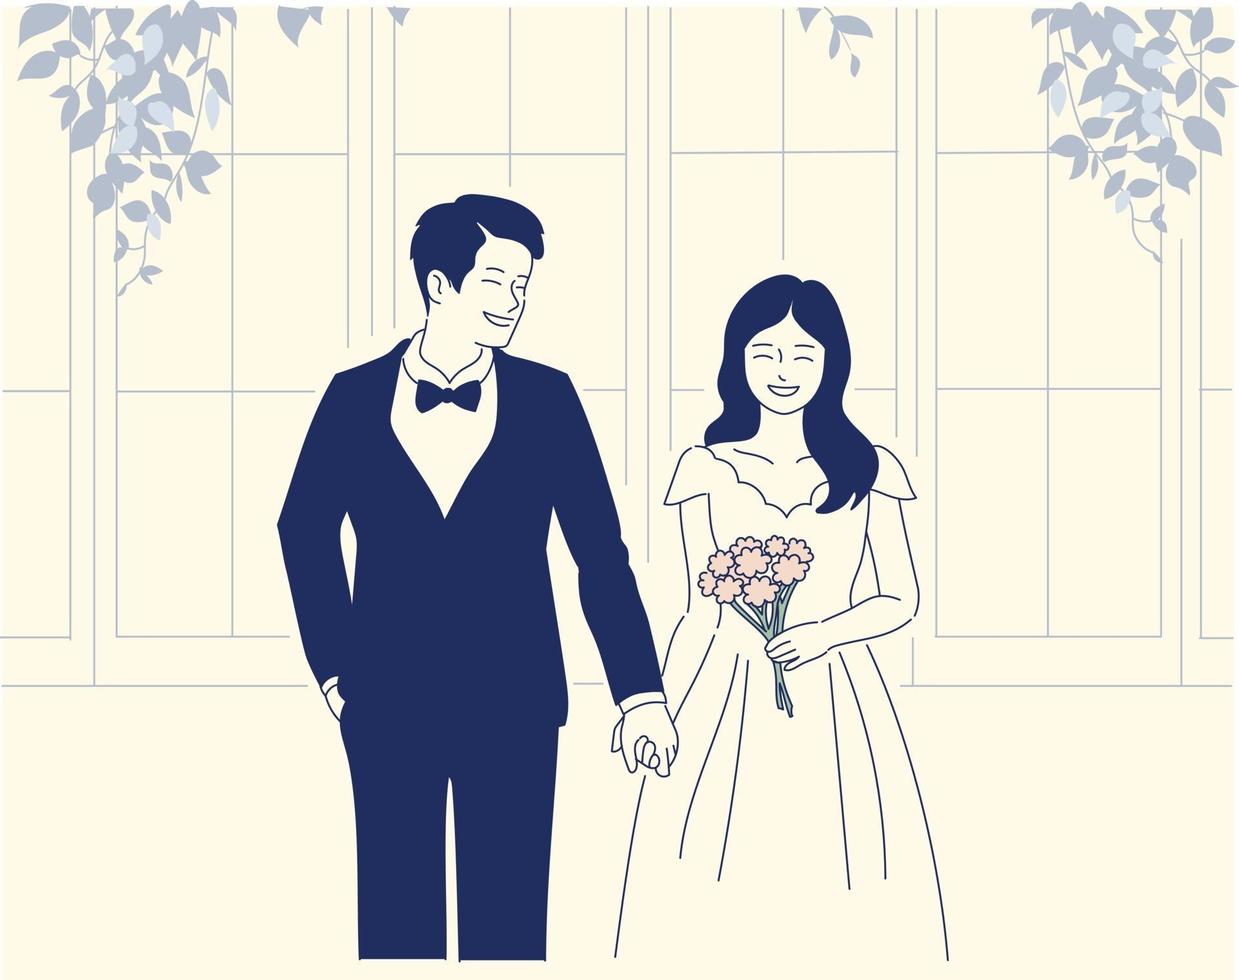 Groom and bride characters. hand drawn style vector design illustrations.